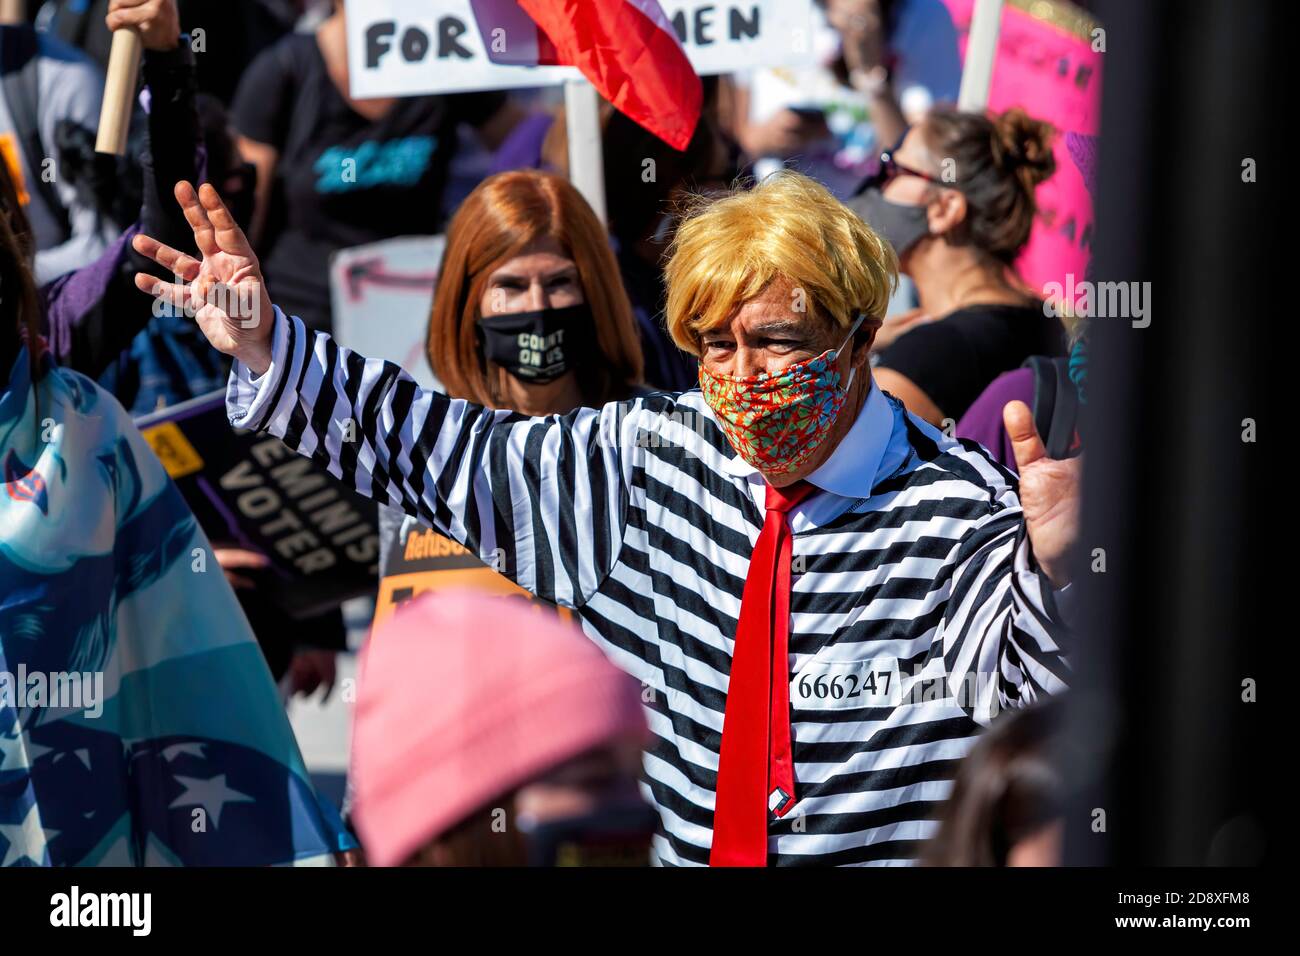 A man dressed as Donald Trump in jail stripes was very popular at the Count on Us Women's March at Freedom Plaza, Washington, DC, USA Stock Photo